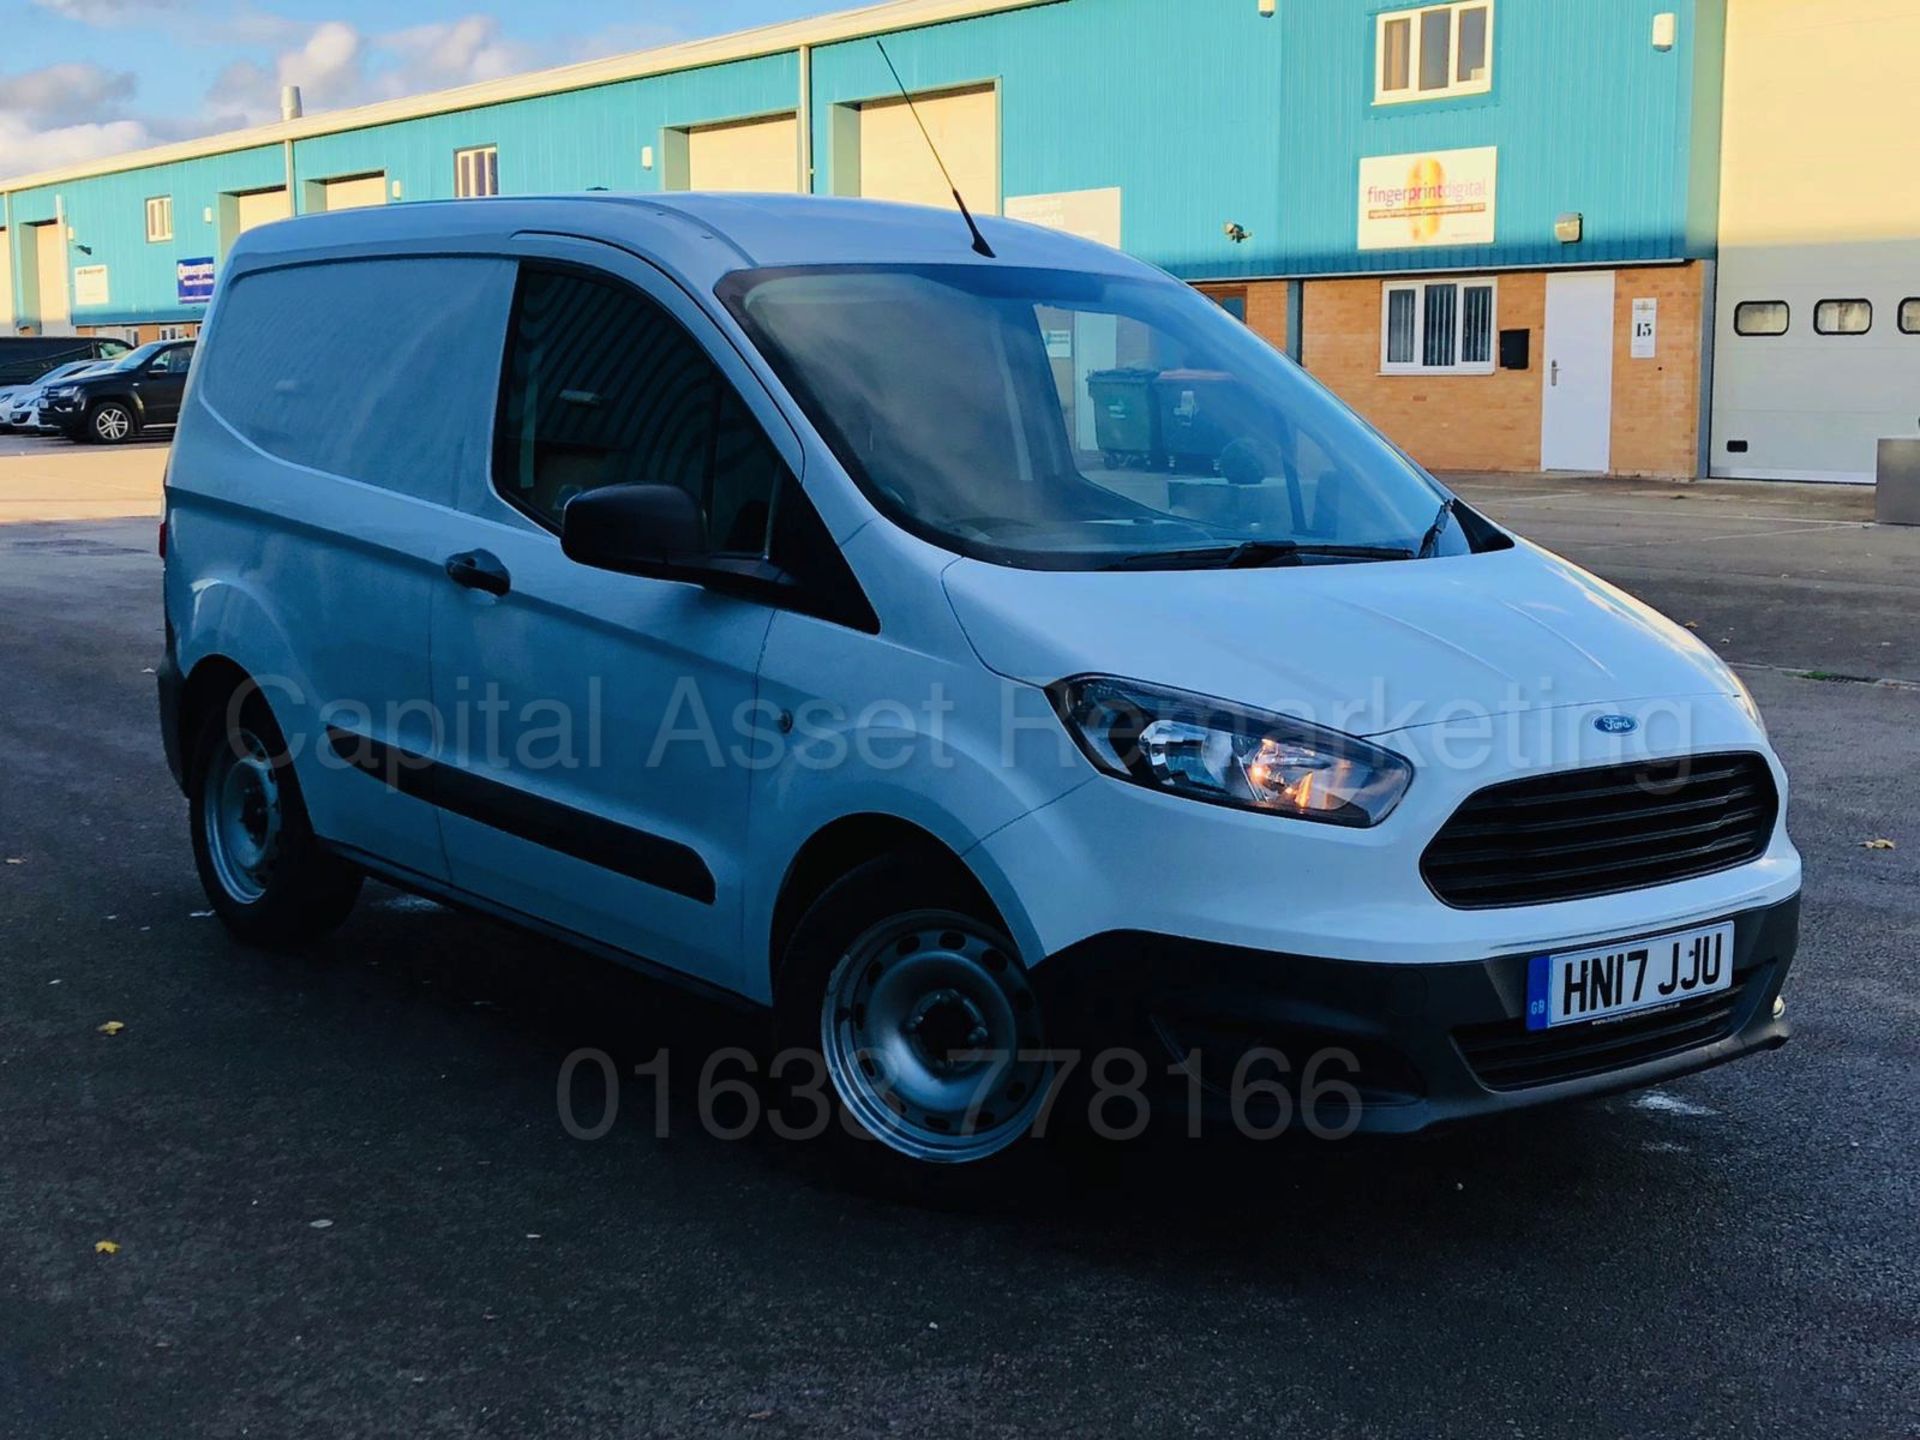 FORD TRANSIT COURIER 'PANEL VAN' *BASE EDITION* (2017) '1.5 TDCI - 75 BHP - 5 SPEED' (1 OWNER) - Image 9 of 25